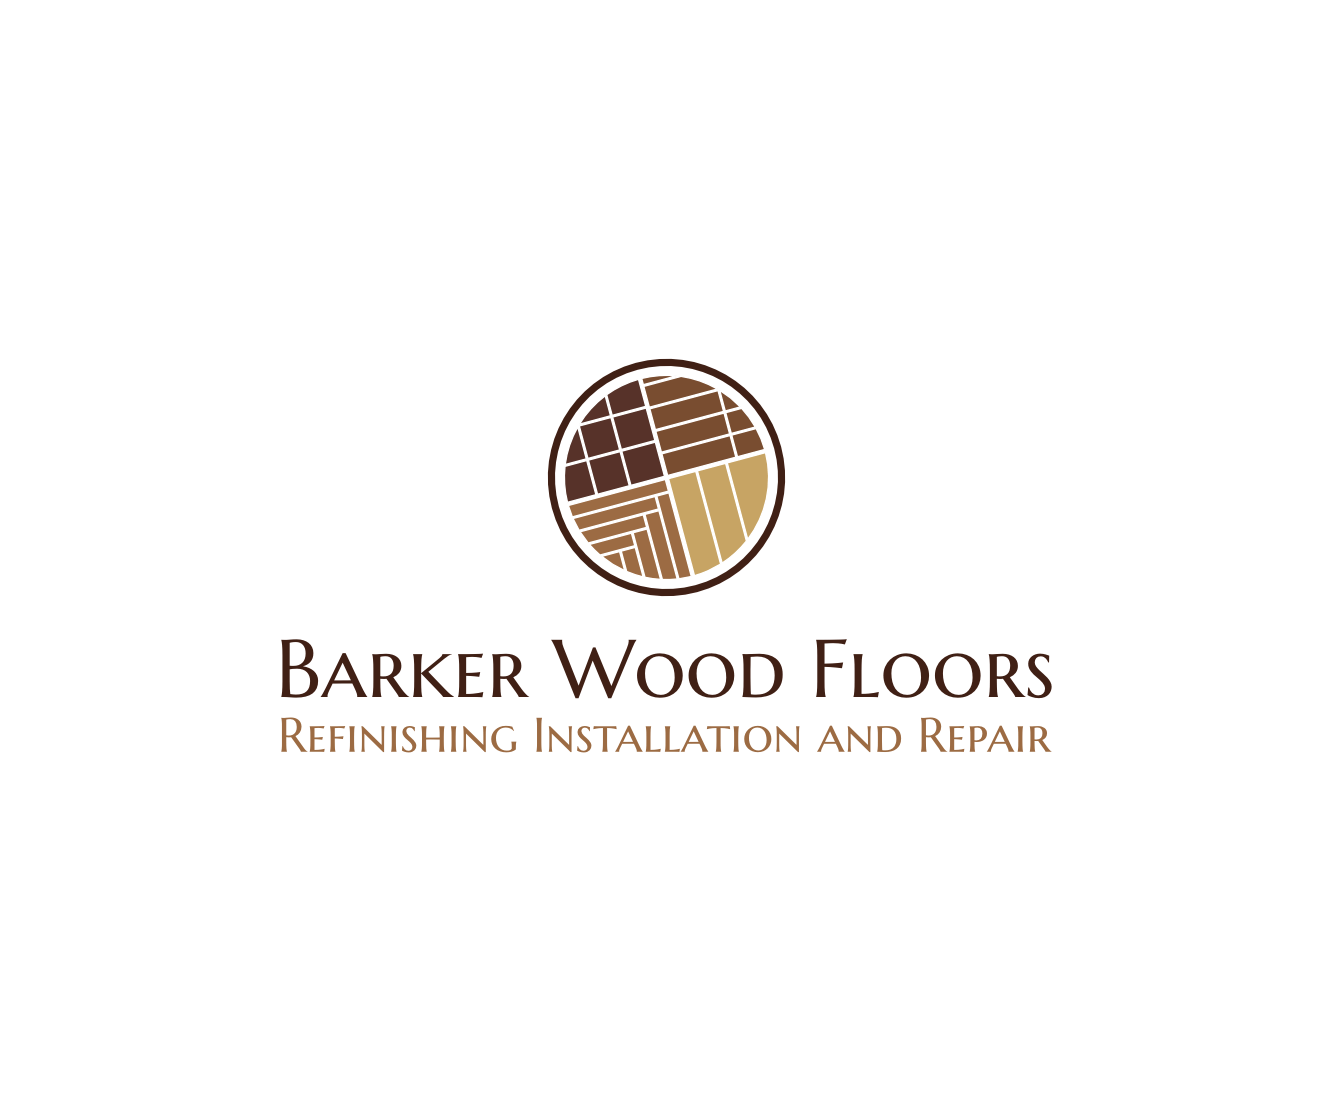 Wood Company Logo - Logo Design by design.bb for New Logo Design Project for my wood ...